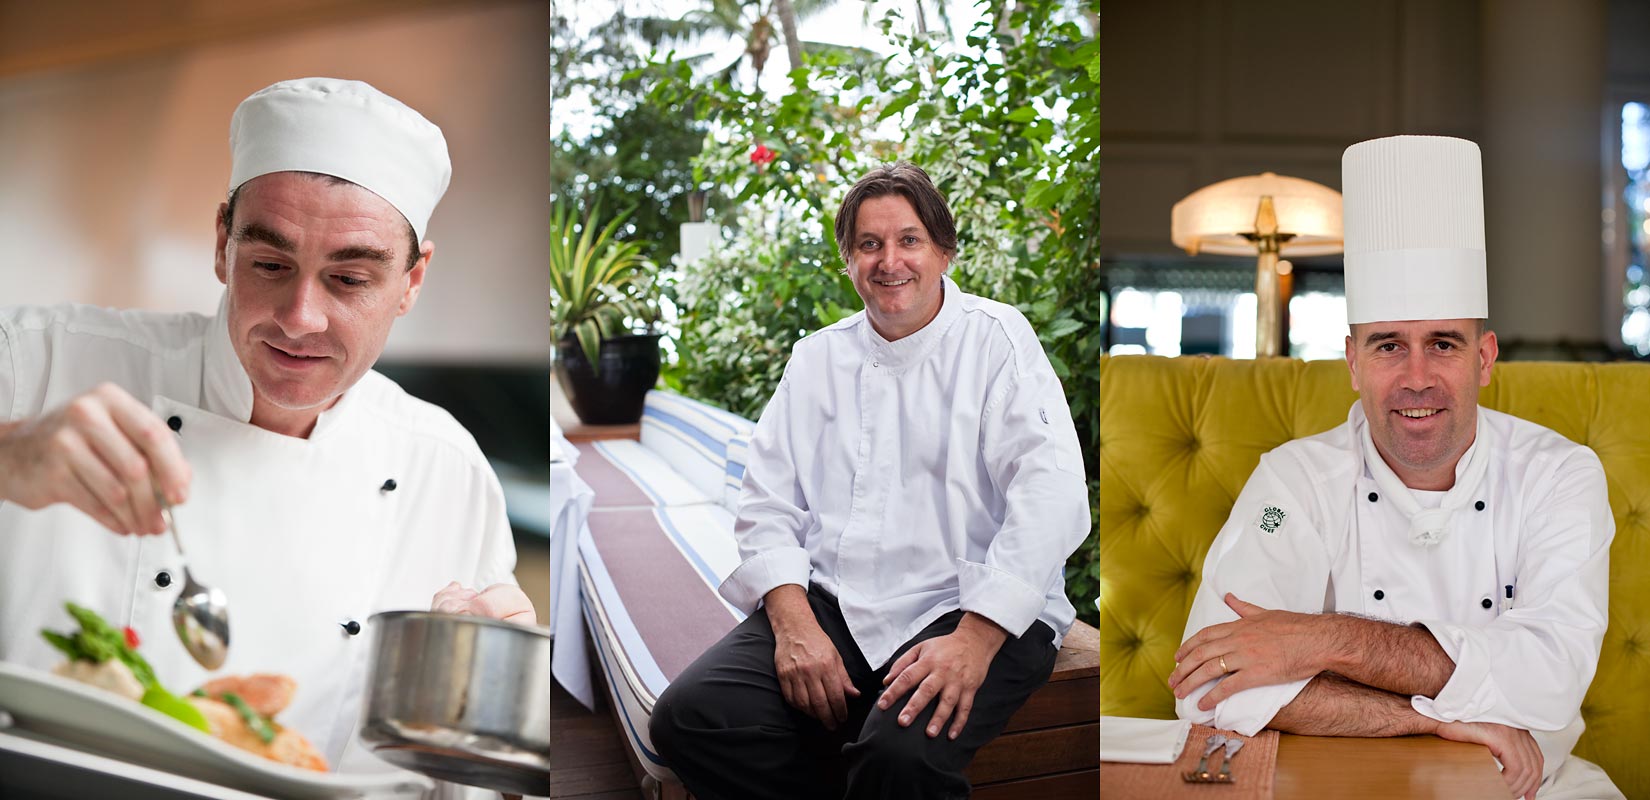 Portrait Photography - Images of Cairns' leading chefs